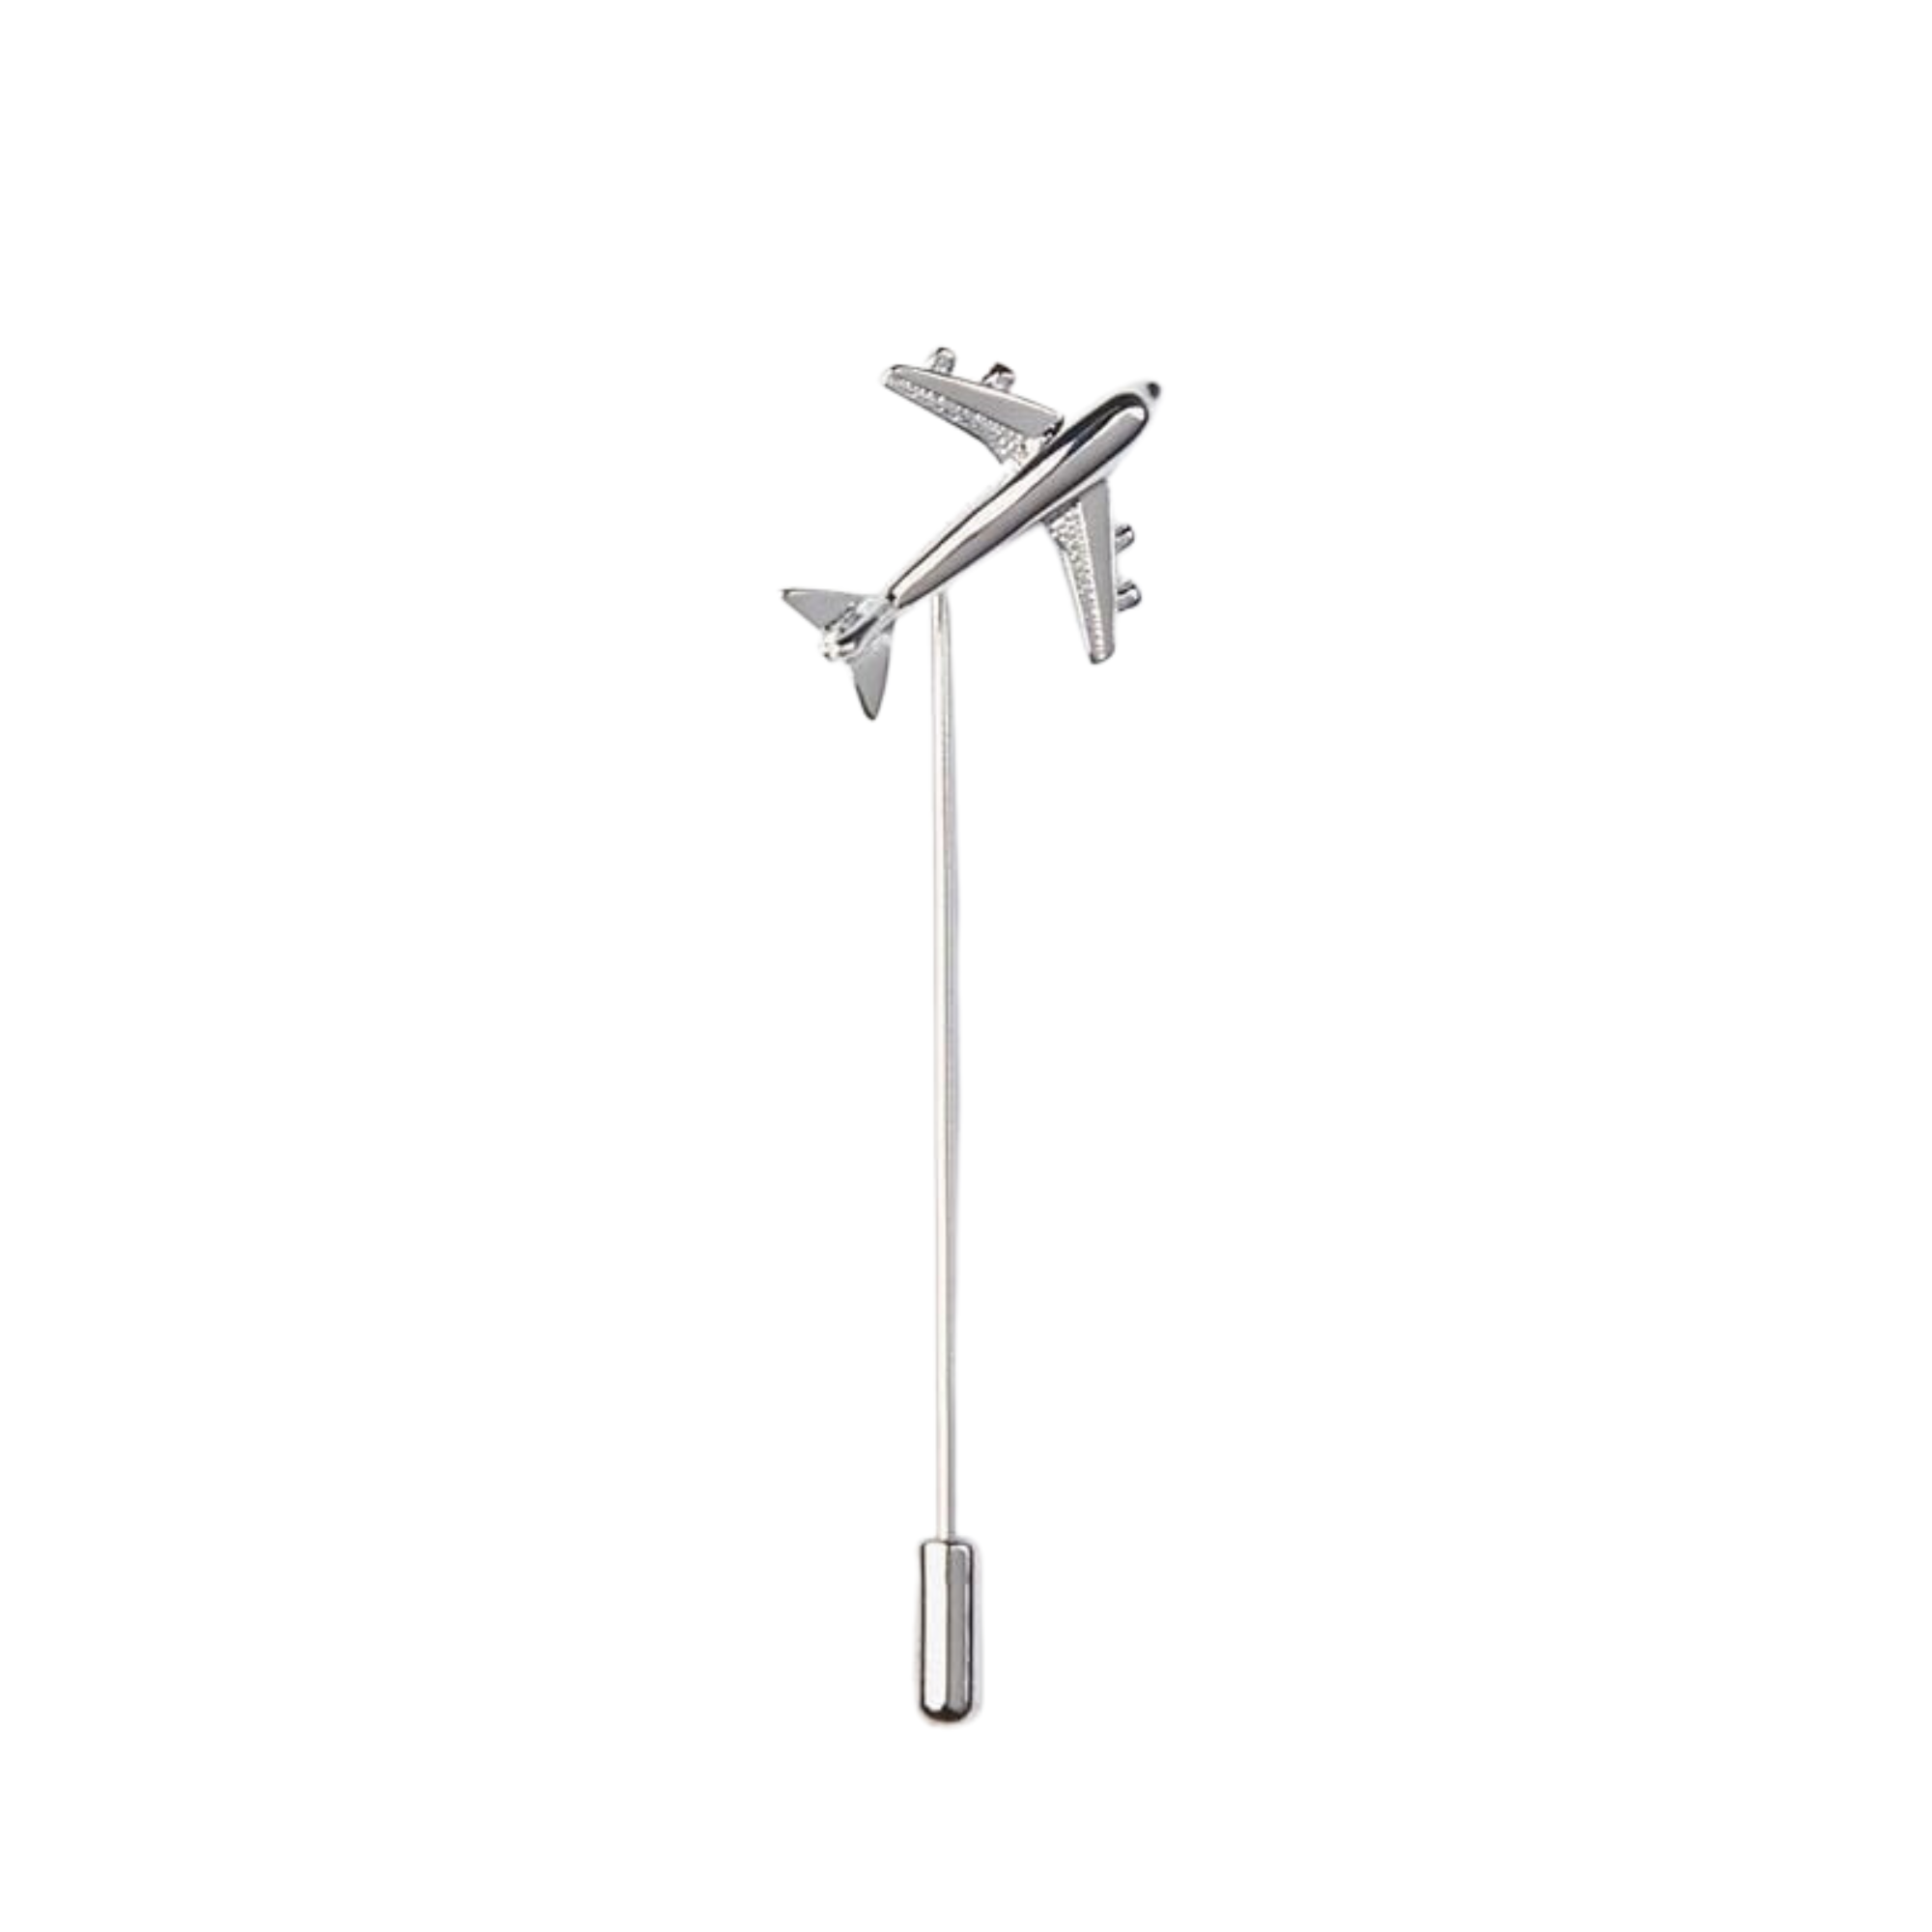 Airplane Lapel Stick Pin in Silver